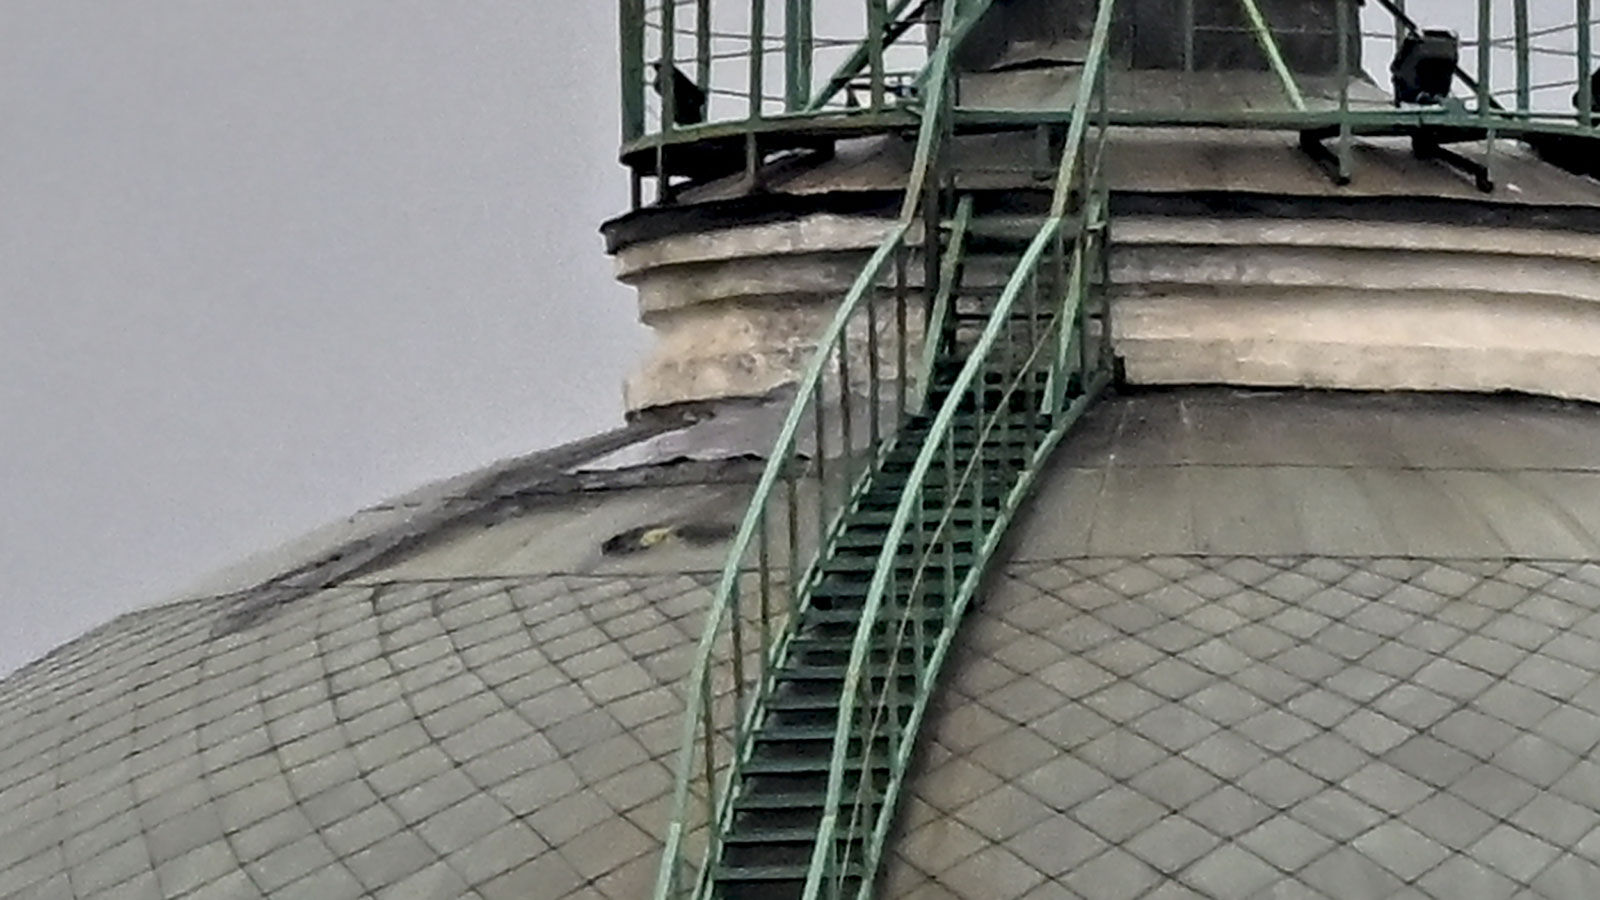 A portion of the dome appears to be damaged.